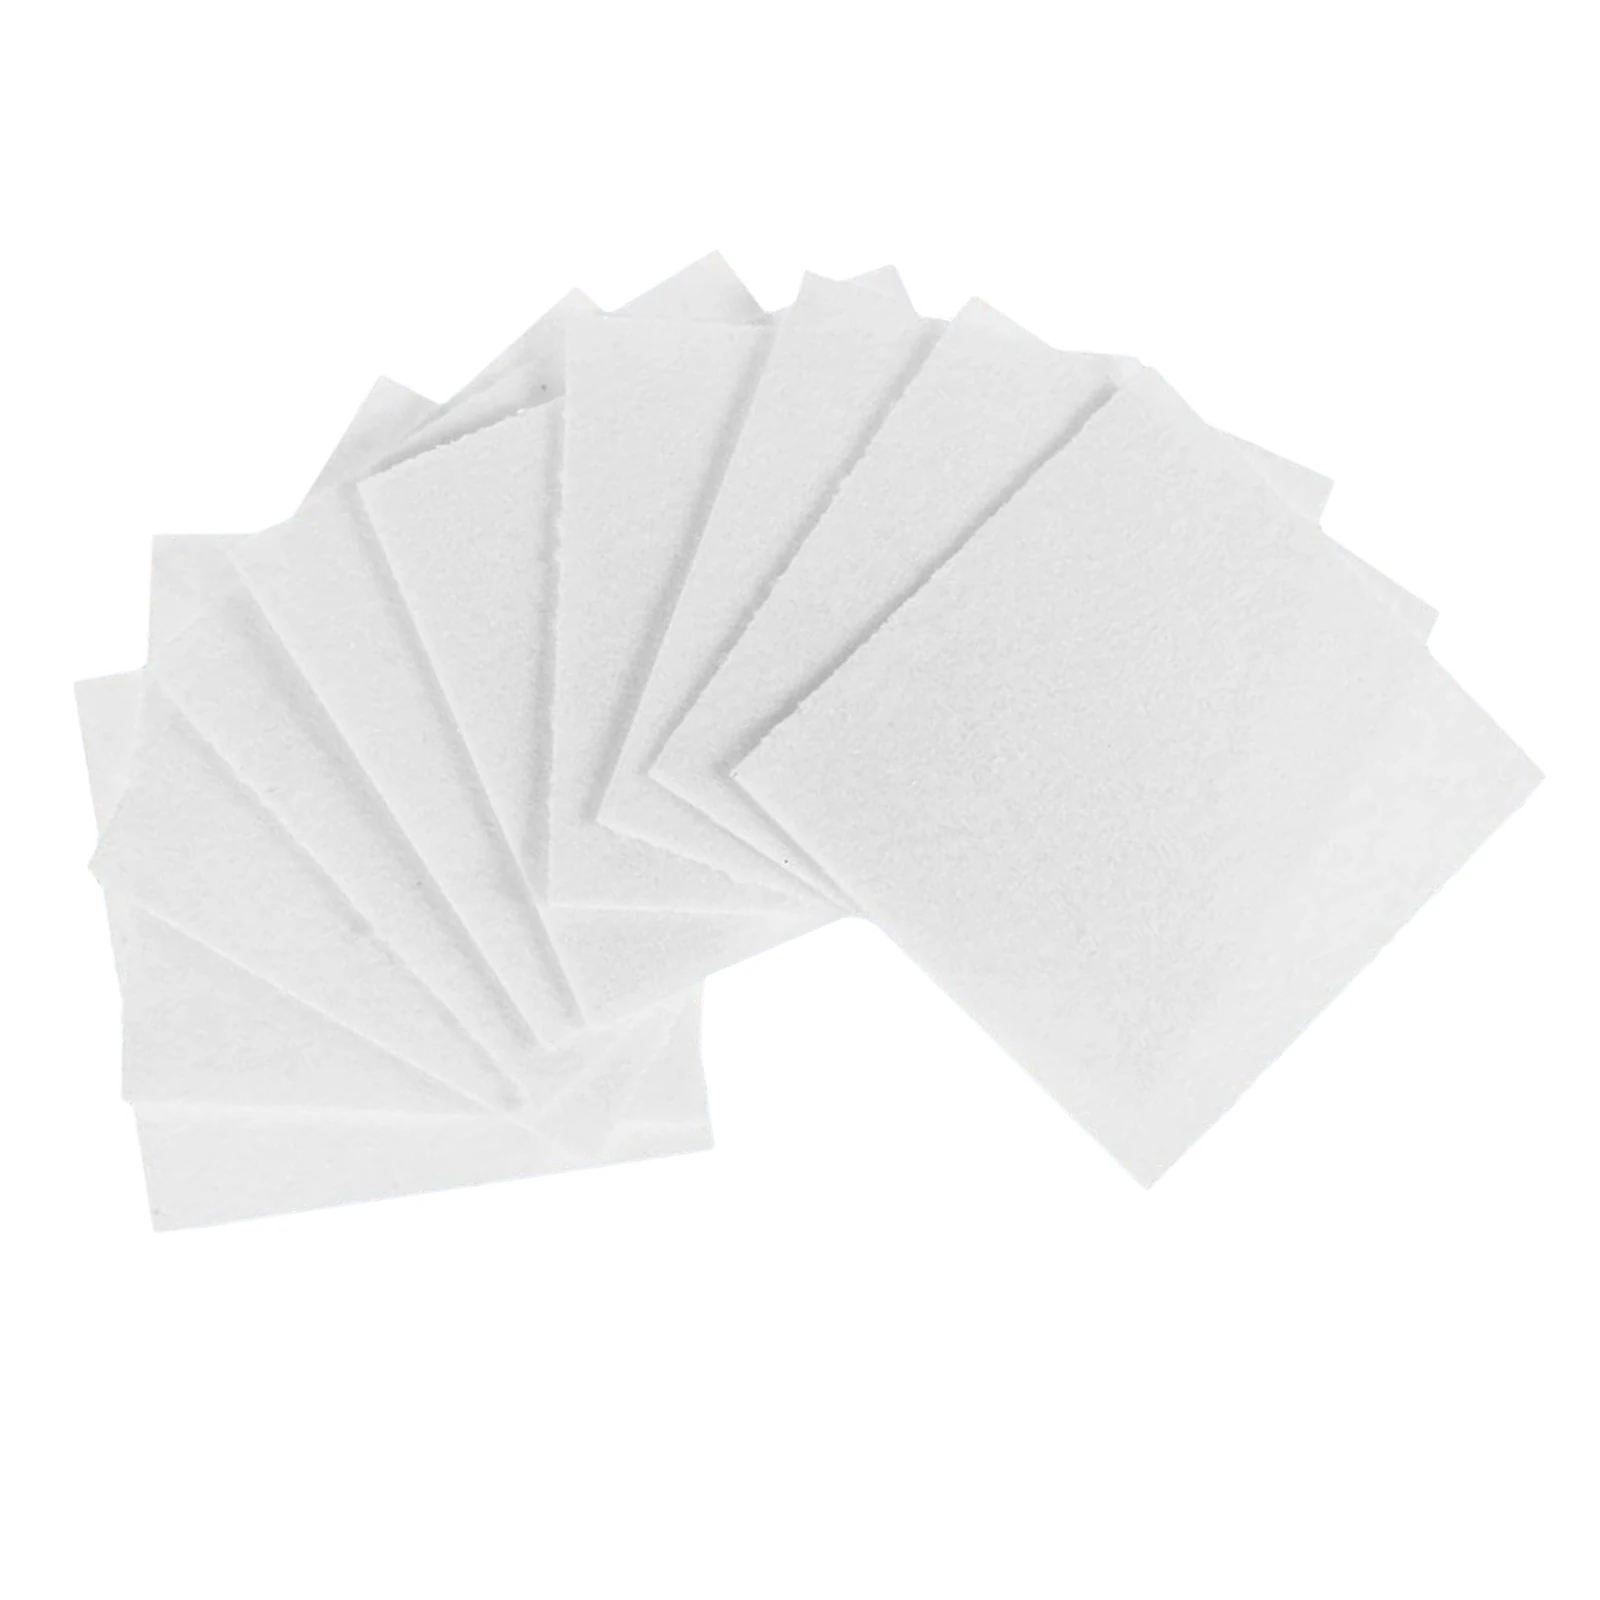 50 Sheets Ceramic Fiber Square Microwave Kiln Glass Fusing Paper 80x80mm For Household Tools